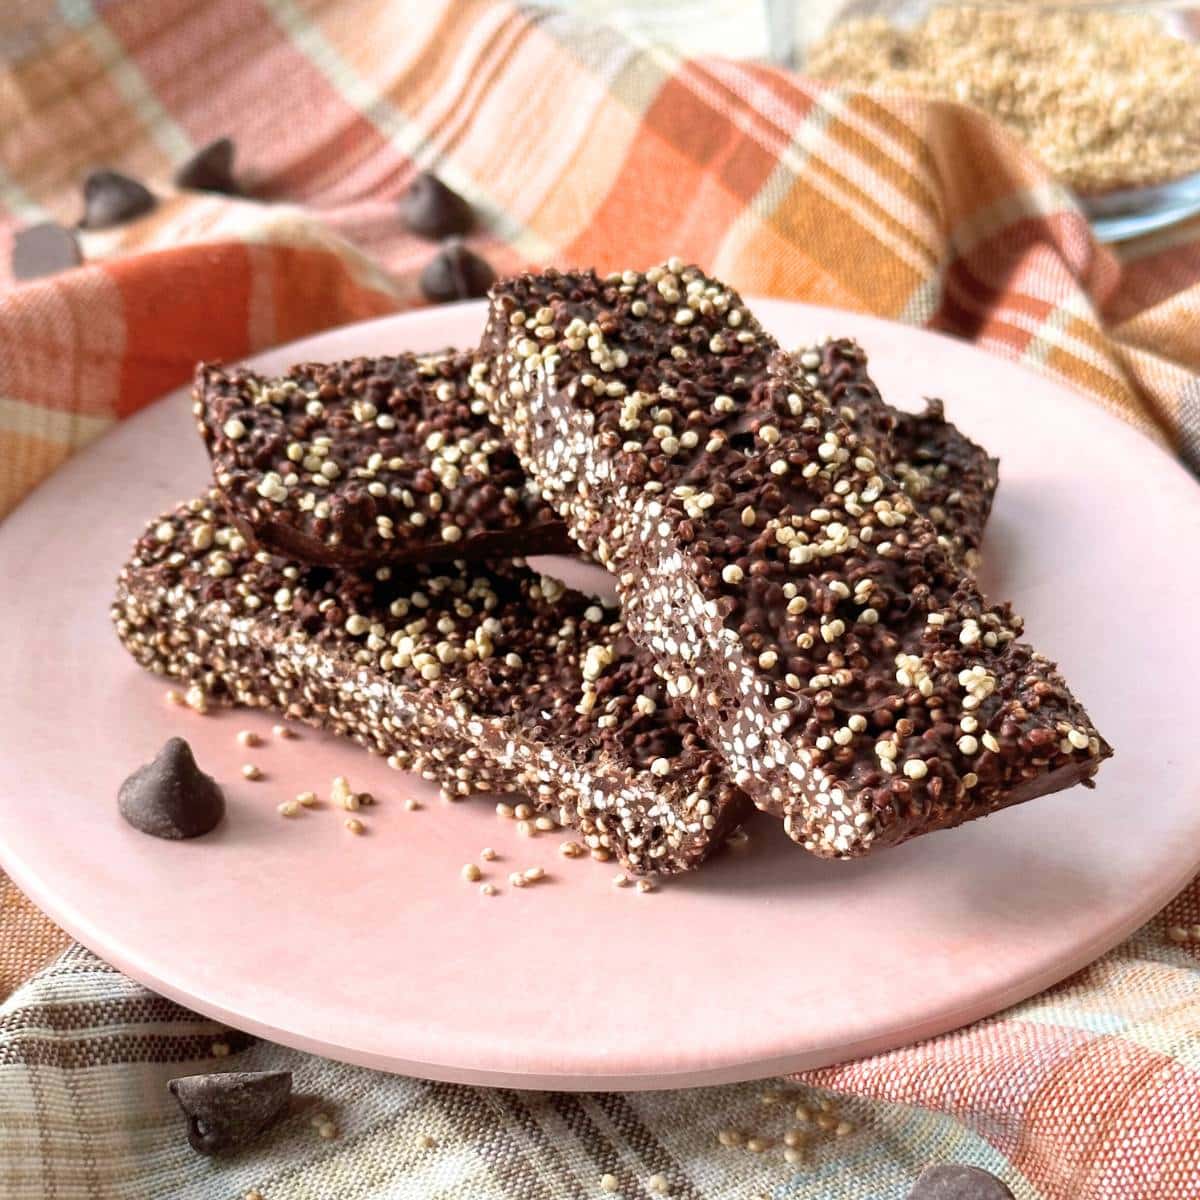 Picture of chocolate quinoa crunch bar using popped quinoa. Chocolate quinoa crunch bars are stacked on a pink plate on top of a plaid colorful cloth. Background shows a bowl of popped quinoa with popped quinoa and chocolate chips scattered around.